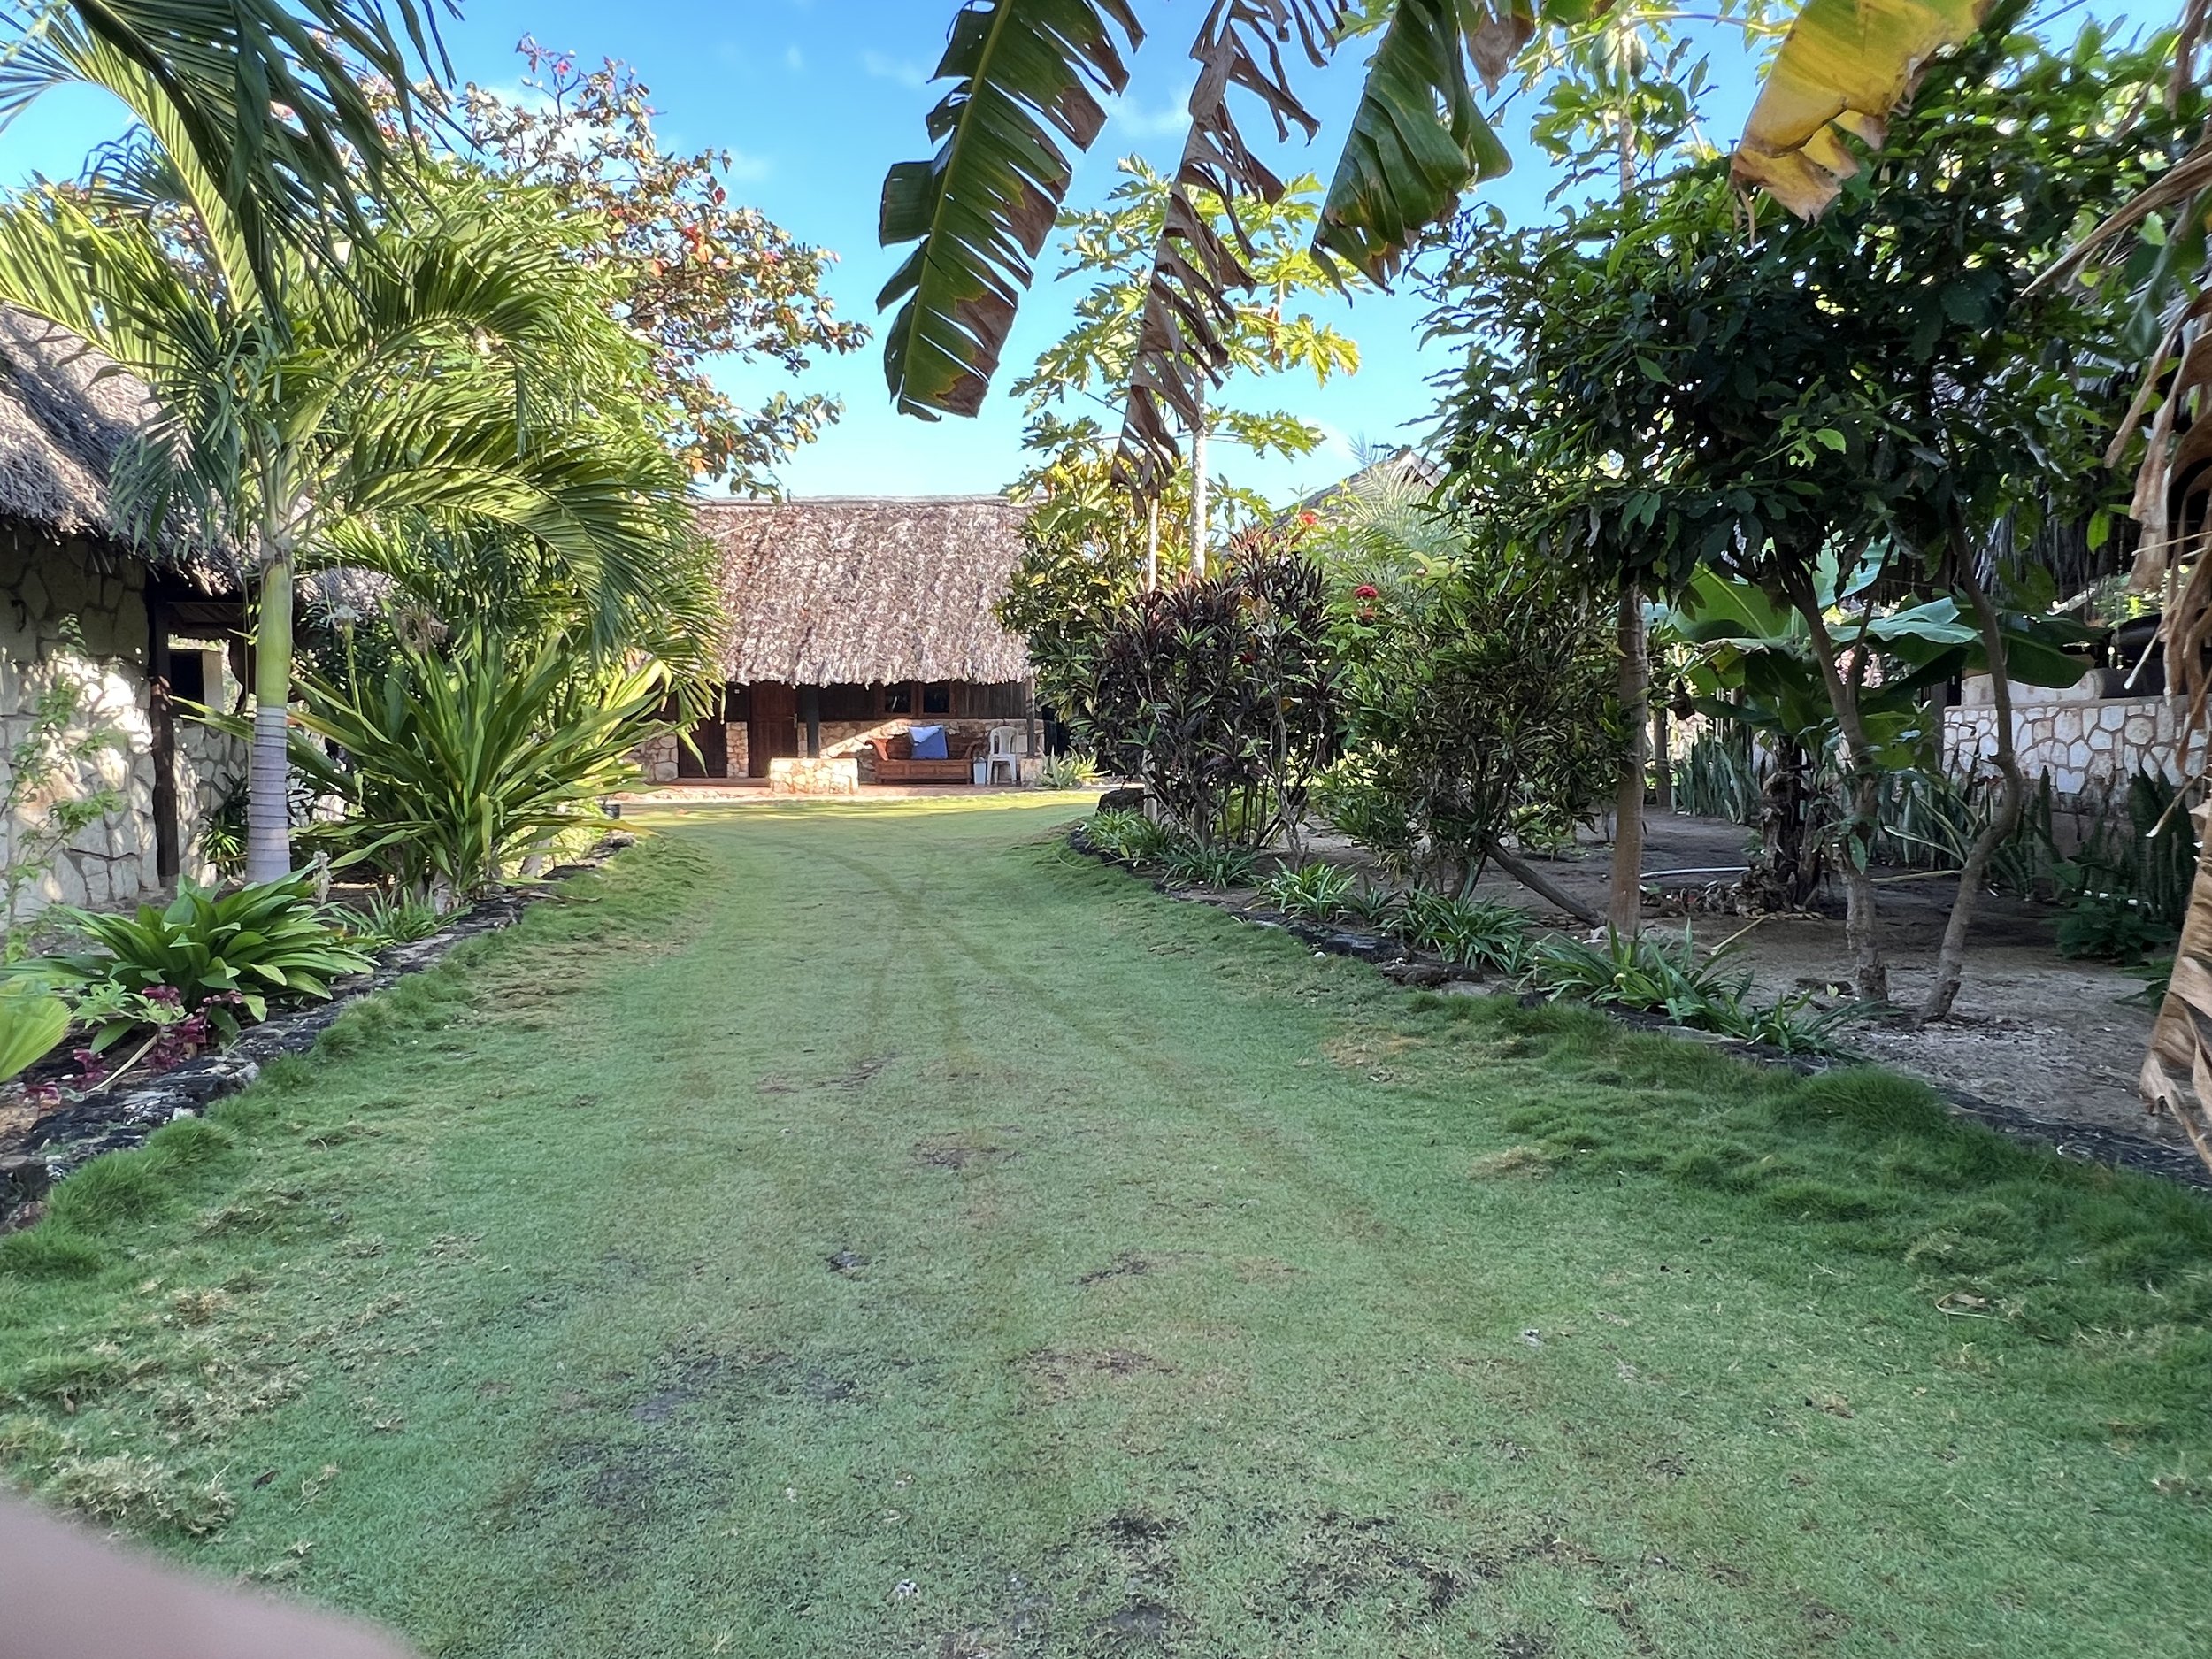 The grass is always greener at Lualemba Bungalows. 